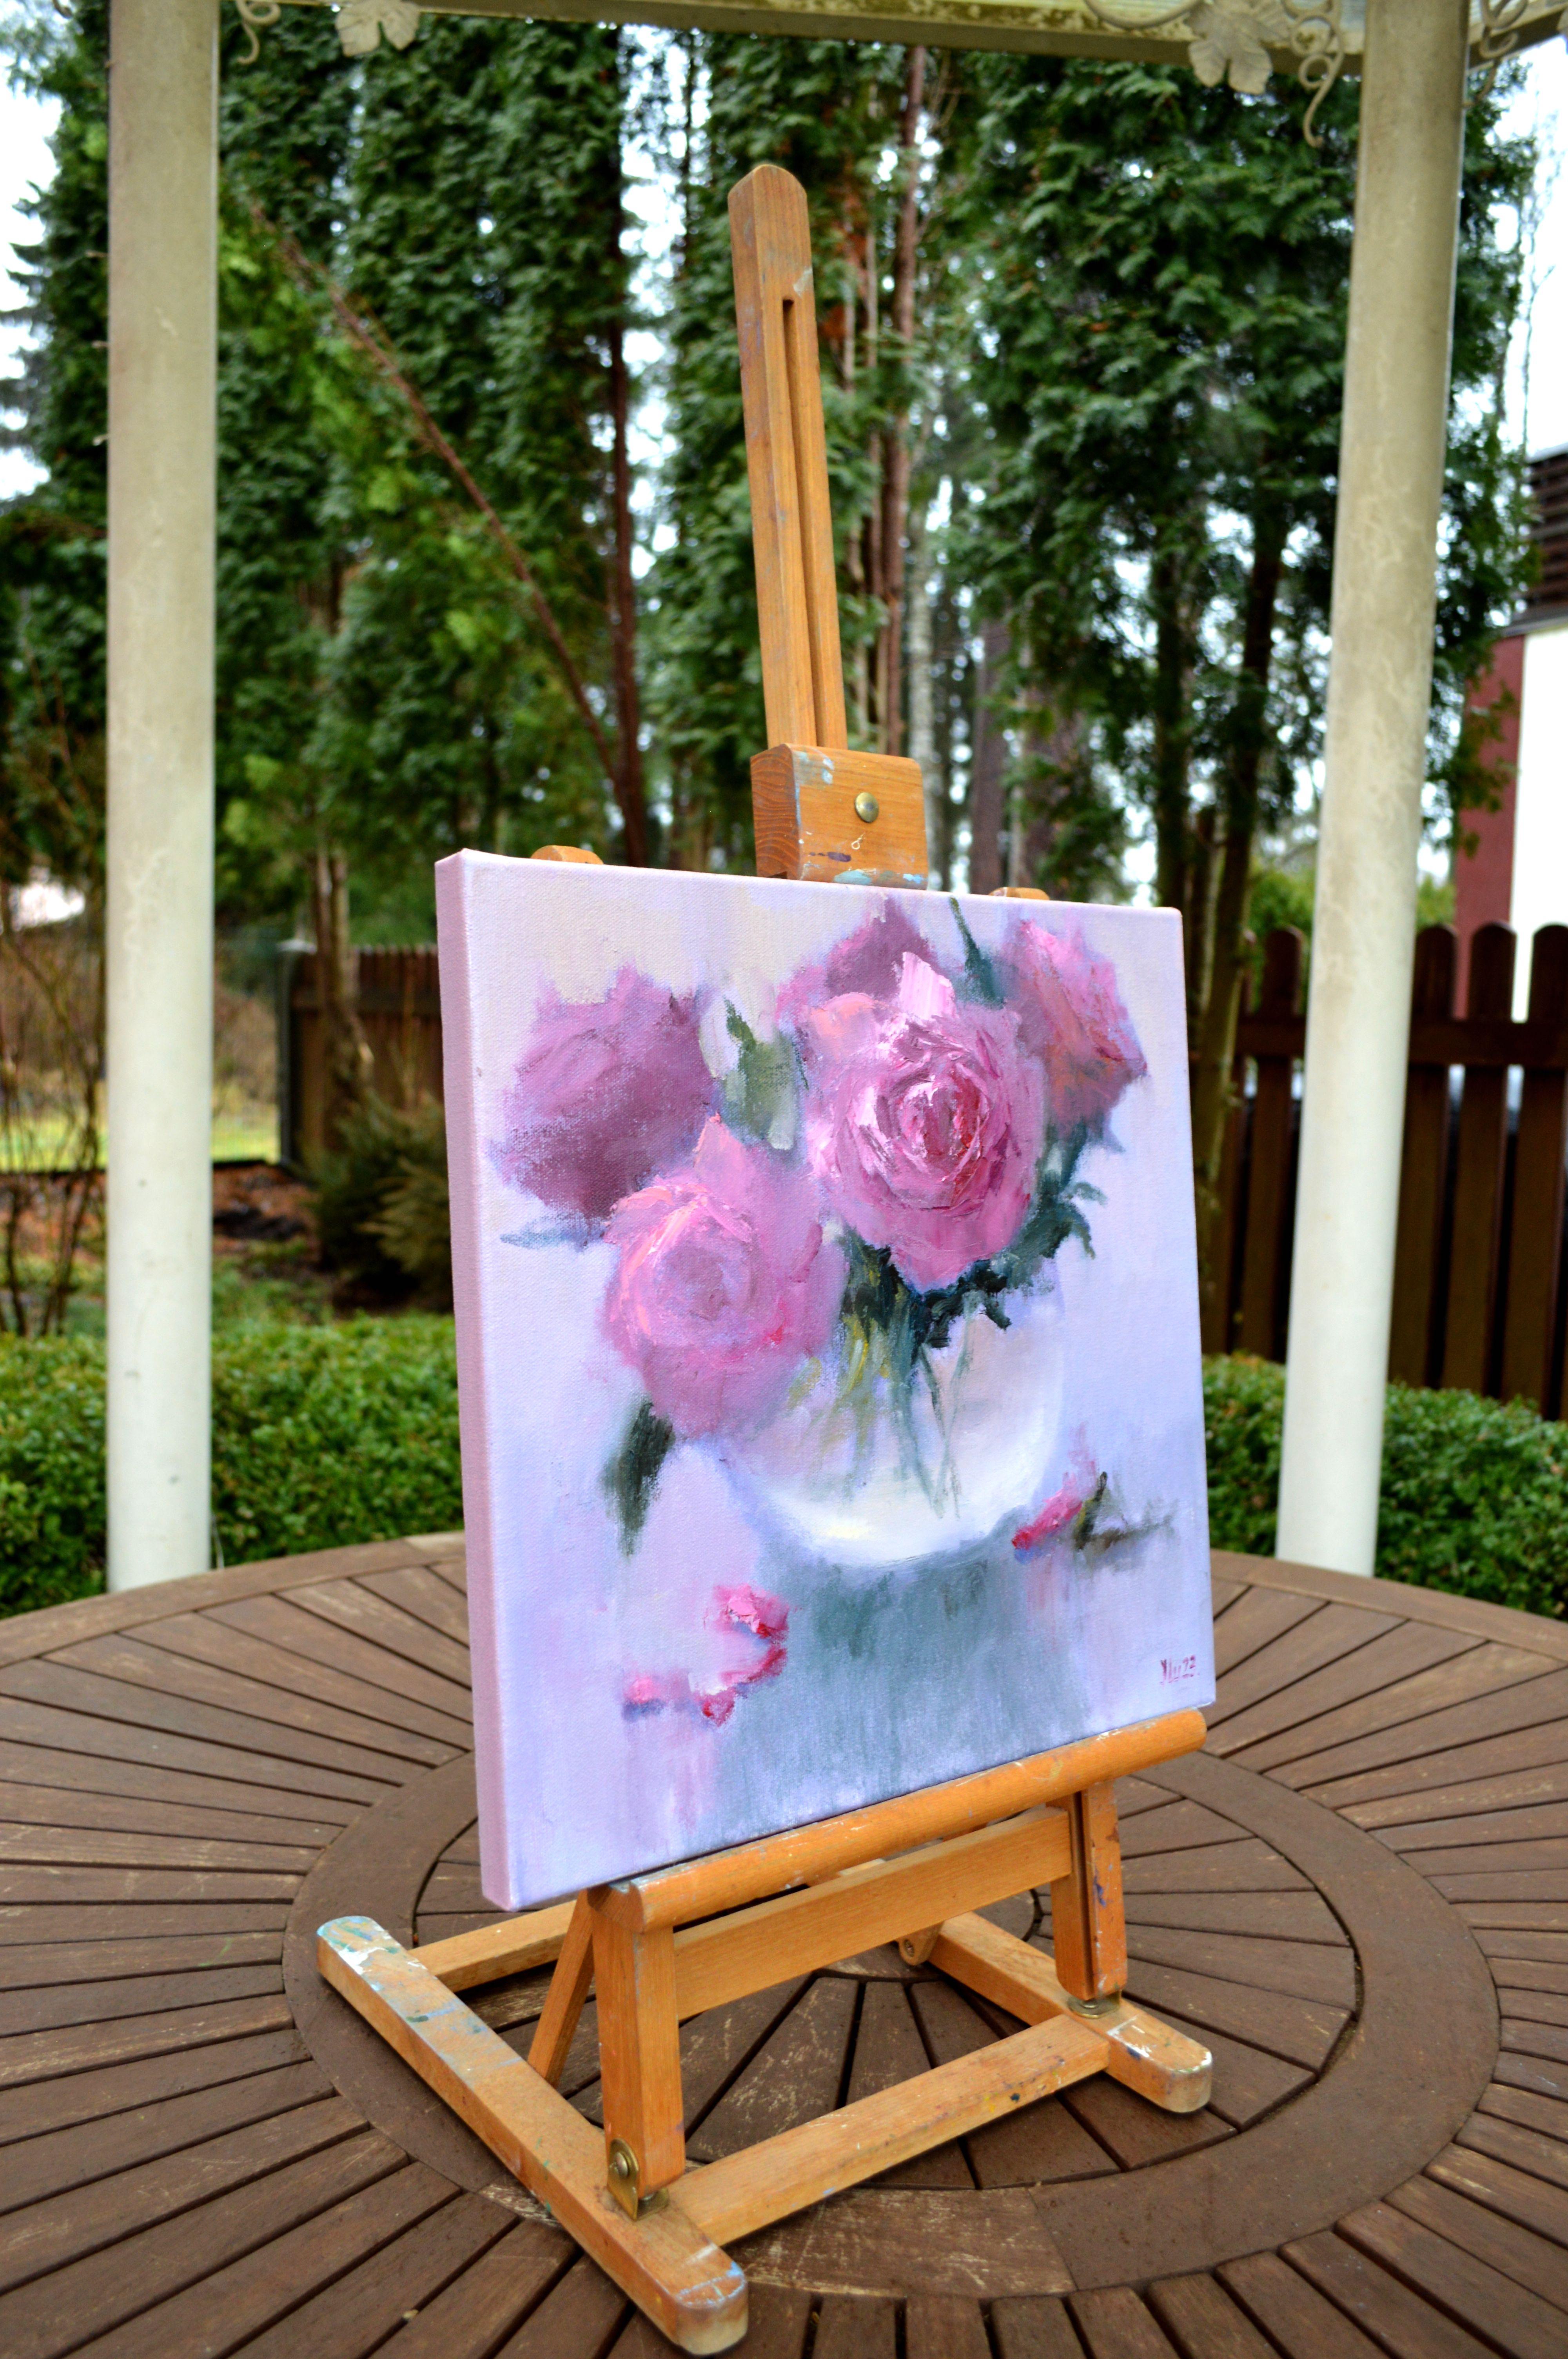 In my creation, I sought to capture the fleeting beauty of life through vibrant strokes, harmoniously blending realism and impressionism. This oil painting is a celebration of nature's ephemeral moments, with each petal embodying the emotions and